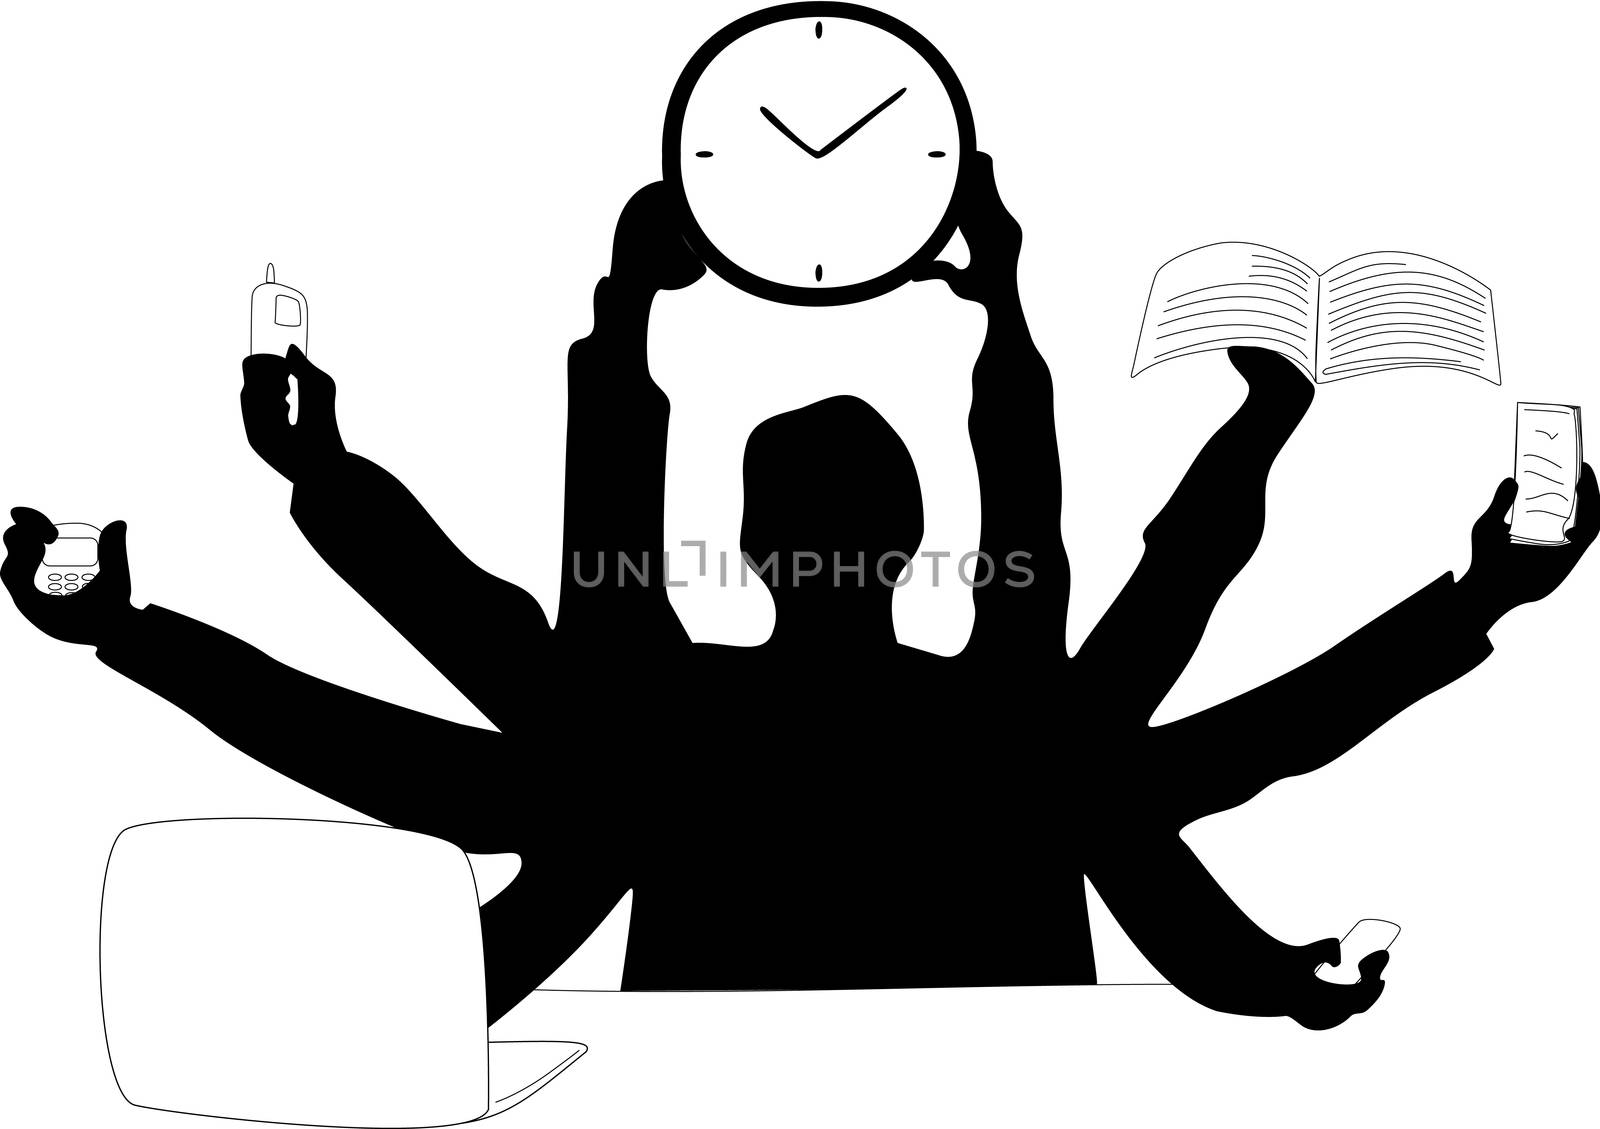 Silhouette of a business man who tries to make use of different devices at the same time, while holding up a clock.